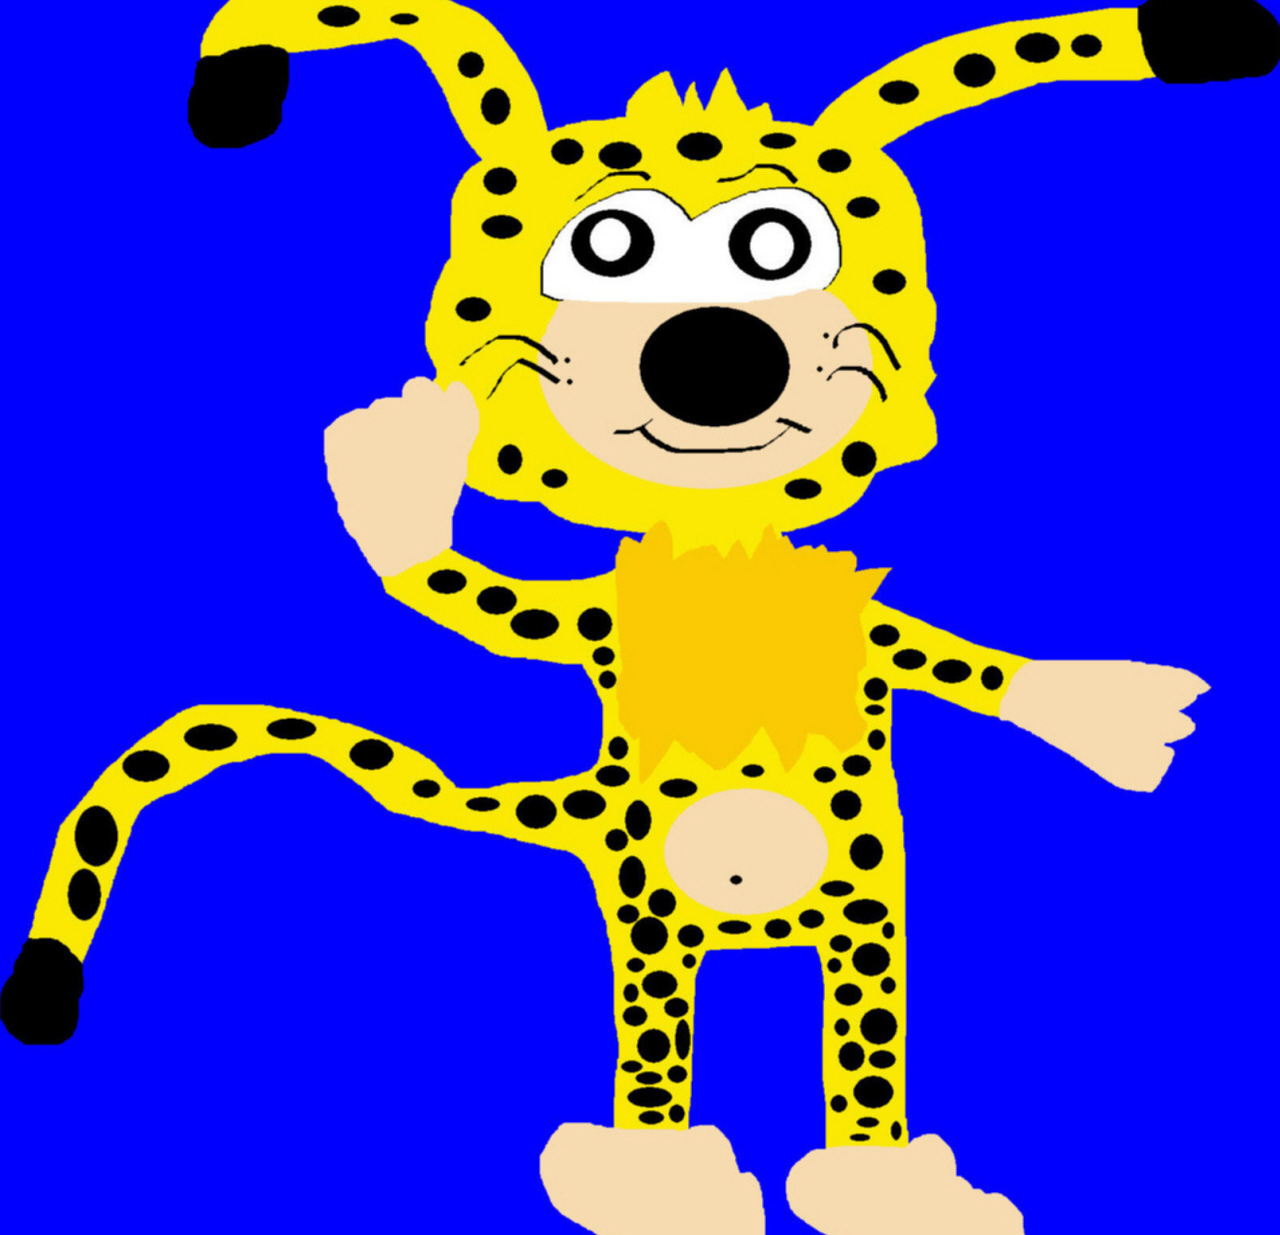 Marsupilami Sonic Style Again Newer For 2017 MS Paint^^ by Falconlobo